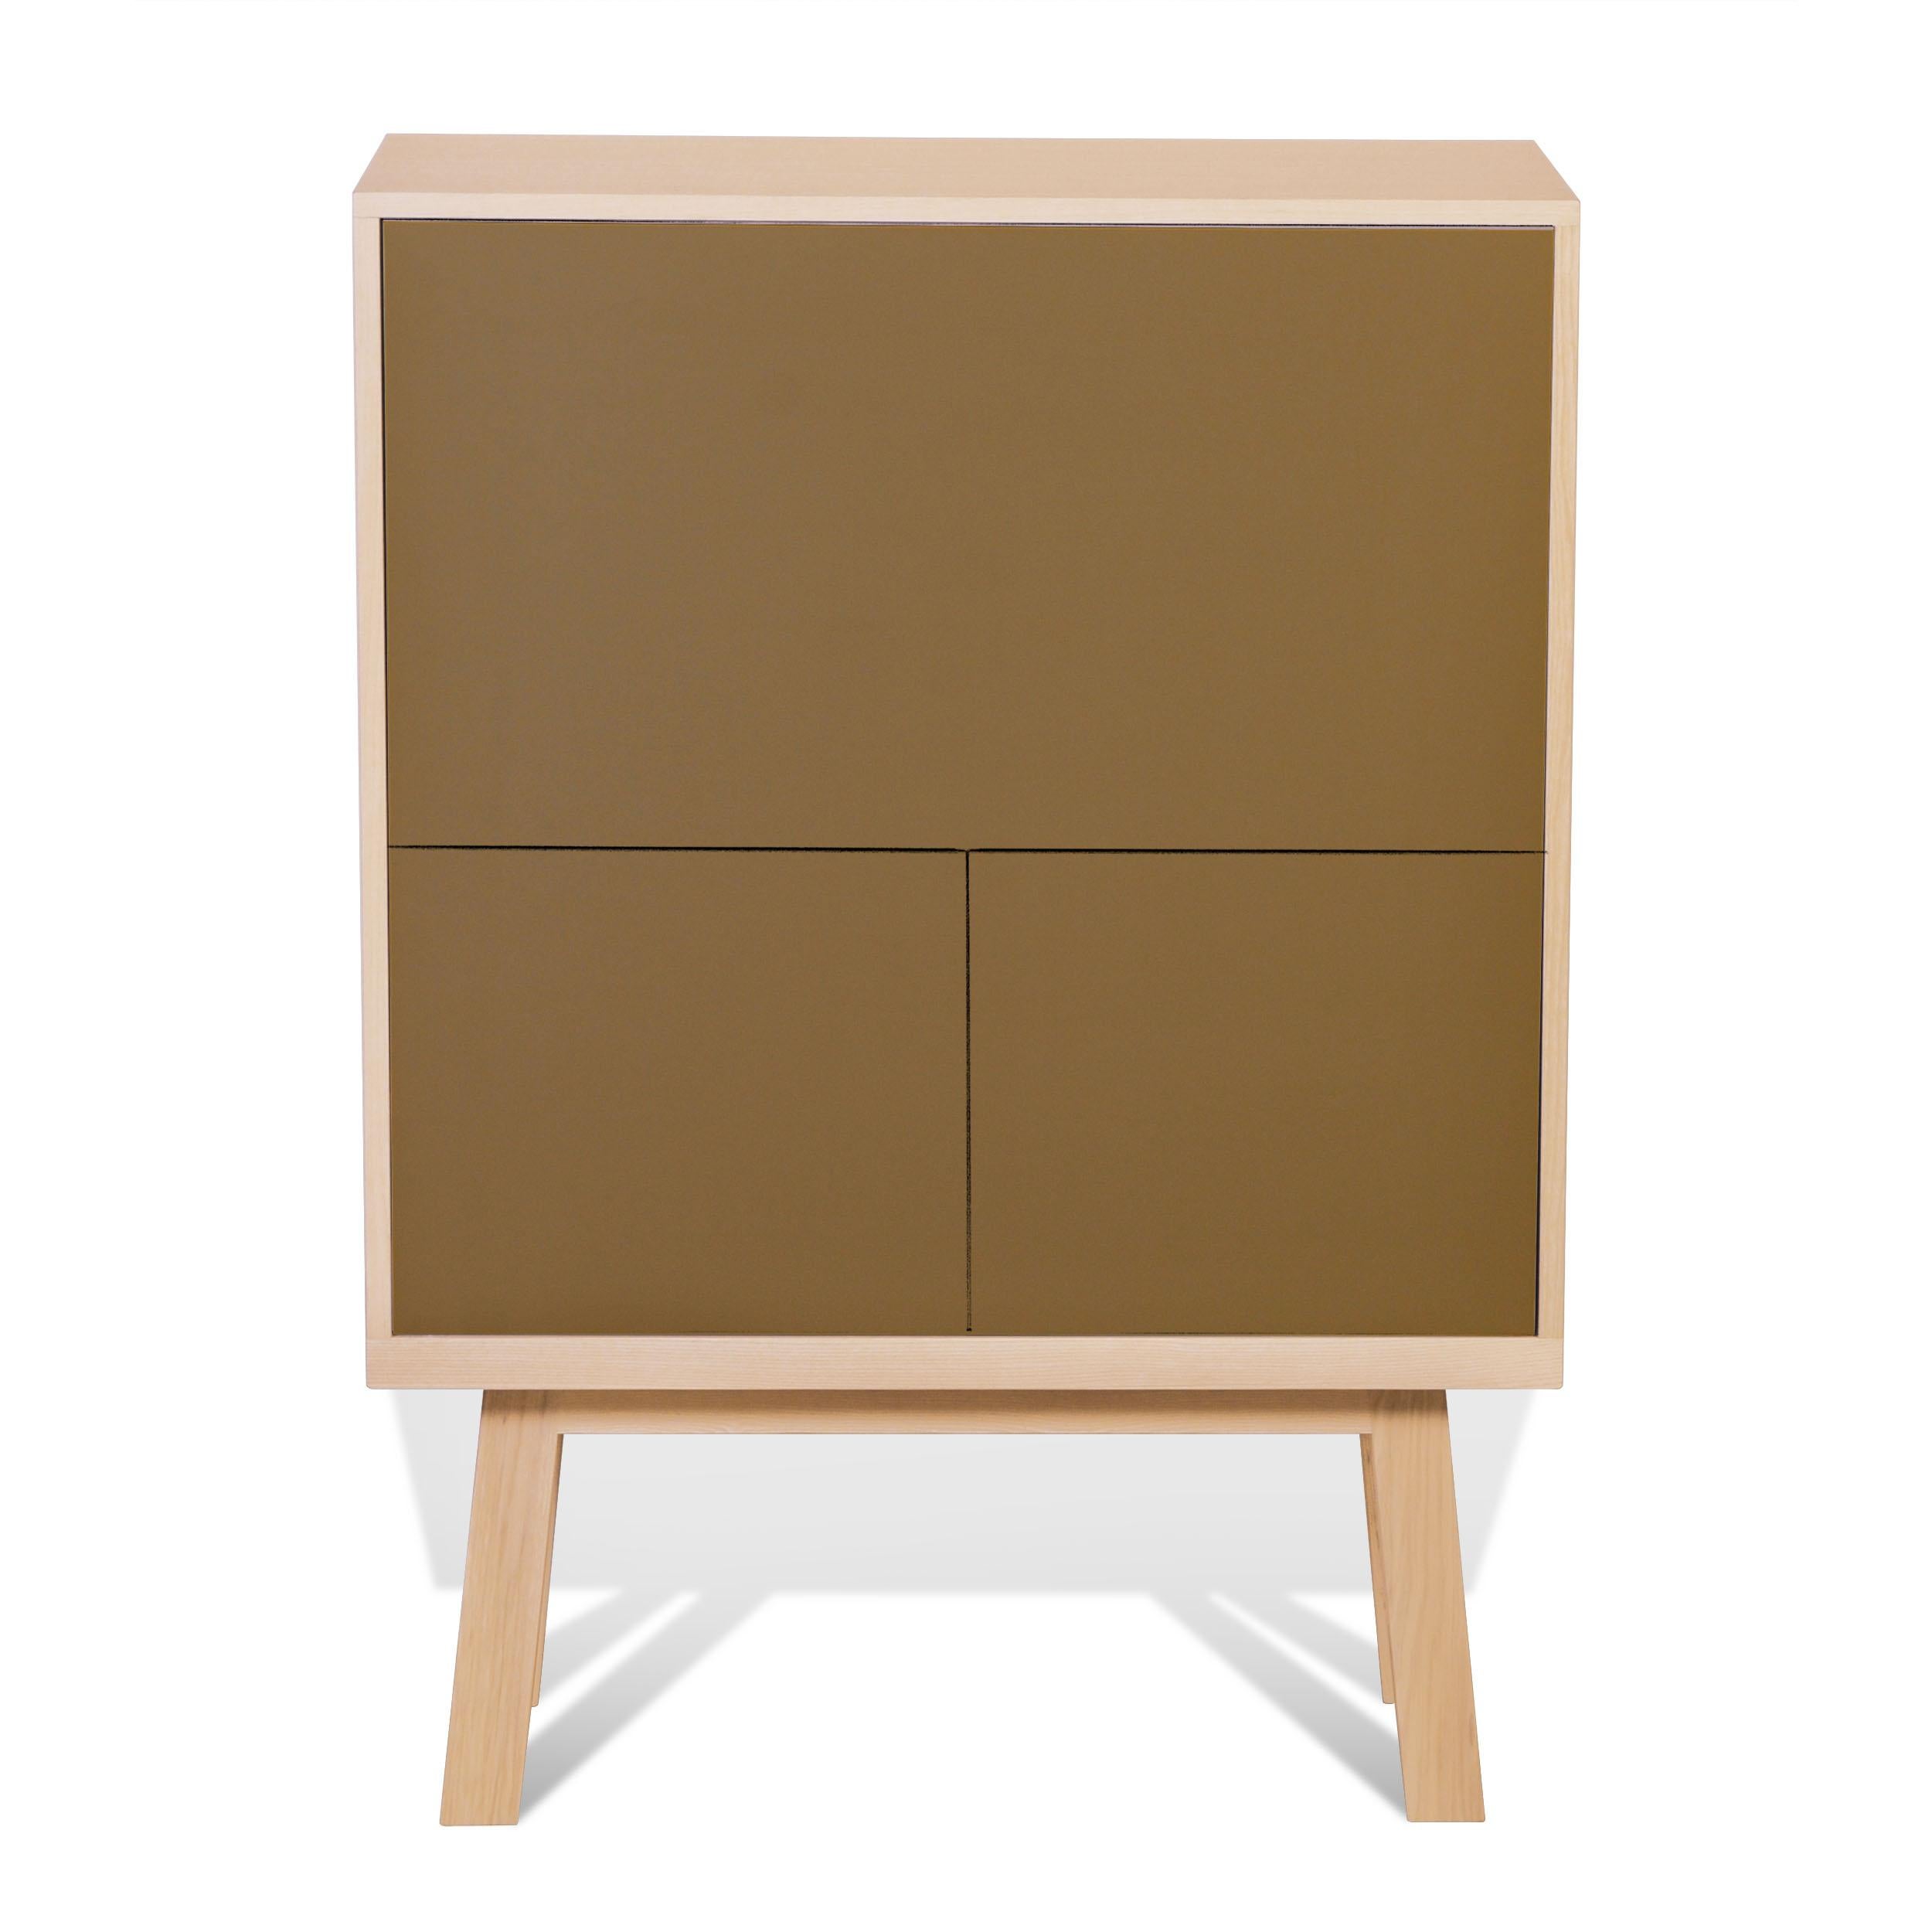 Hand-Crafted Tobacco Leaf Coloured Secretaire Cabinet for Home Work, available in 11 Colours For Sale